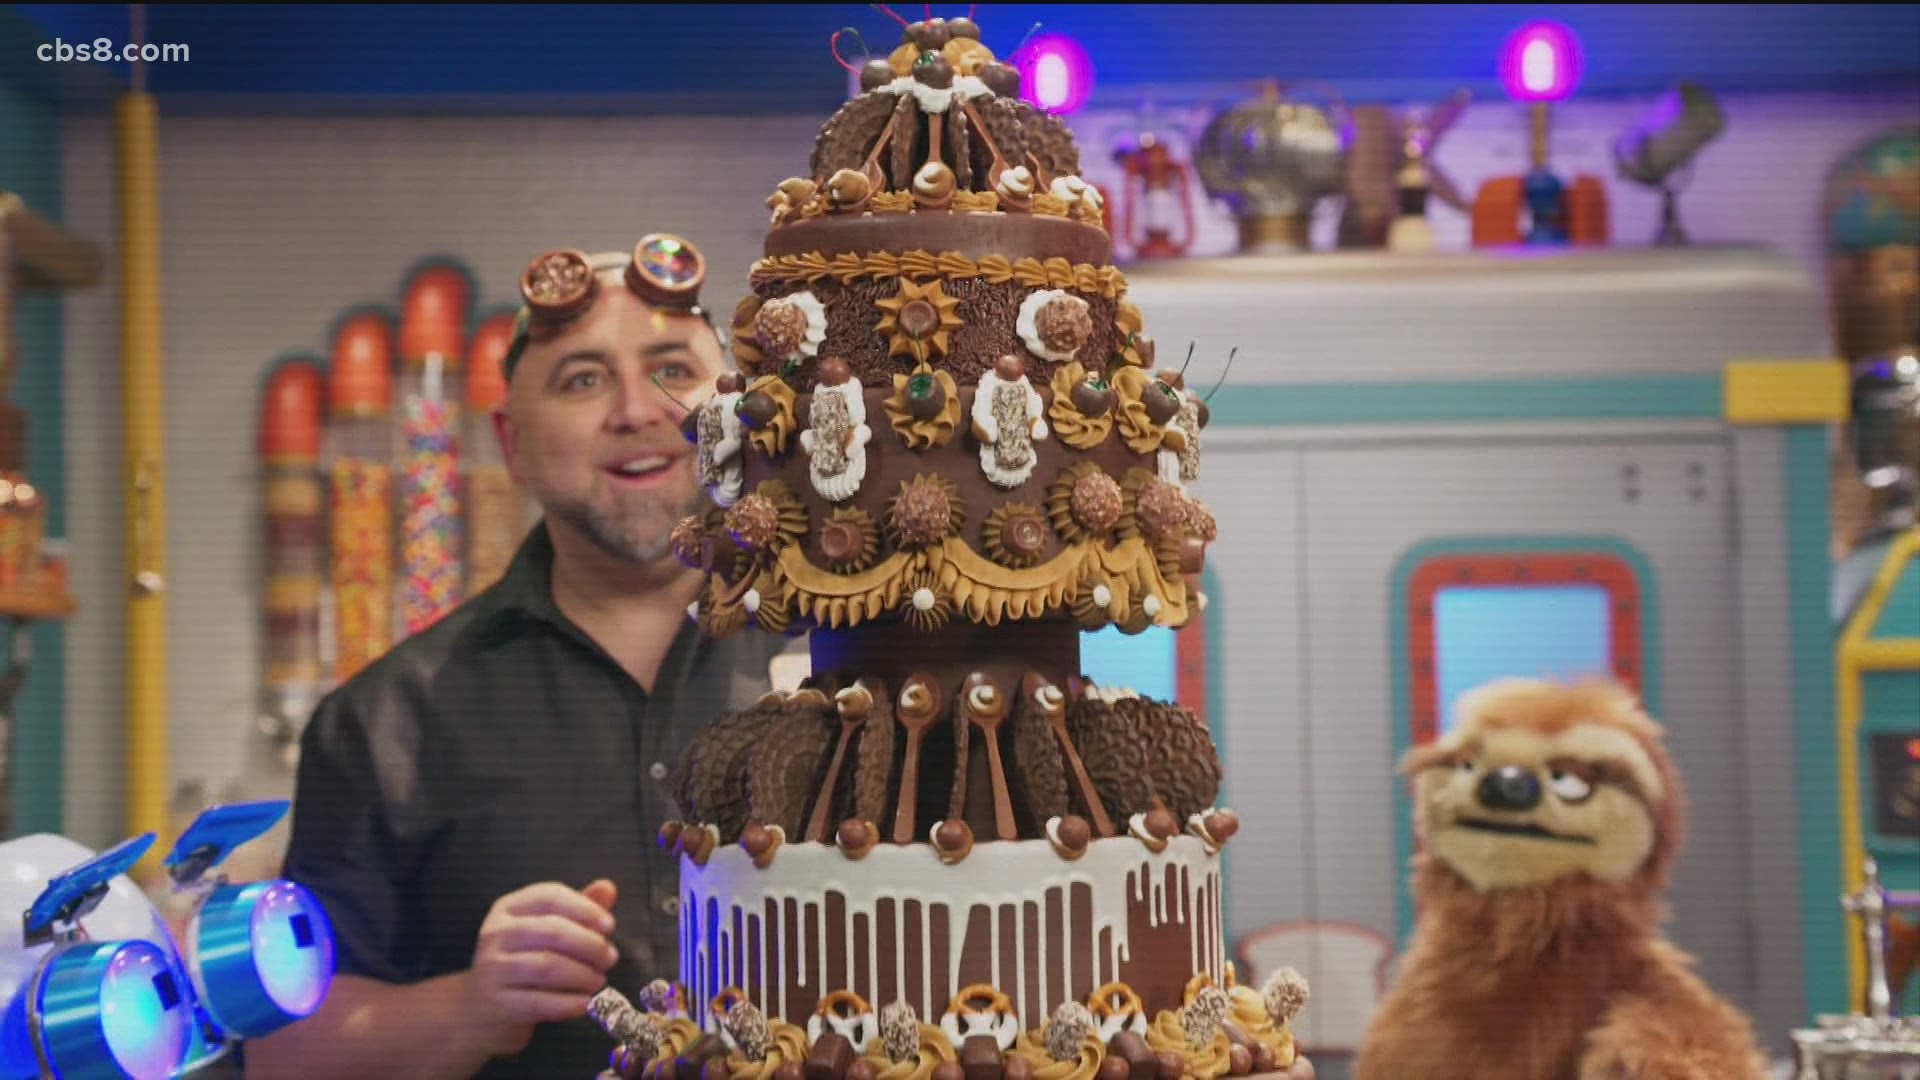 You know him from The Food Network's Ace of Cakes and Buddy Vs. Duff. Now, Celebrity chef Duff Goldman has a brand new kid-friendly food and science show.